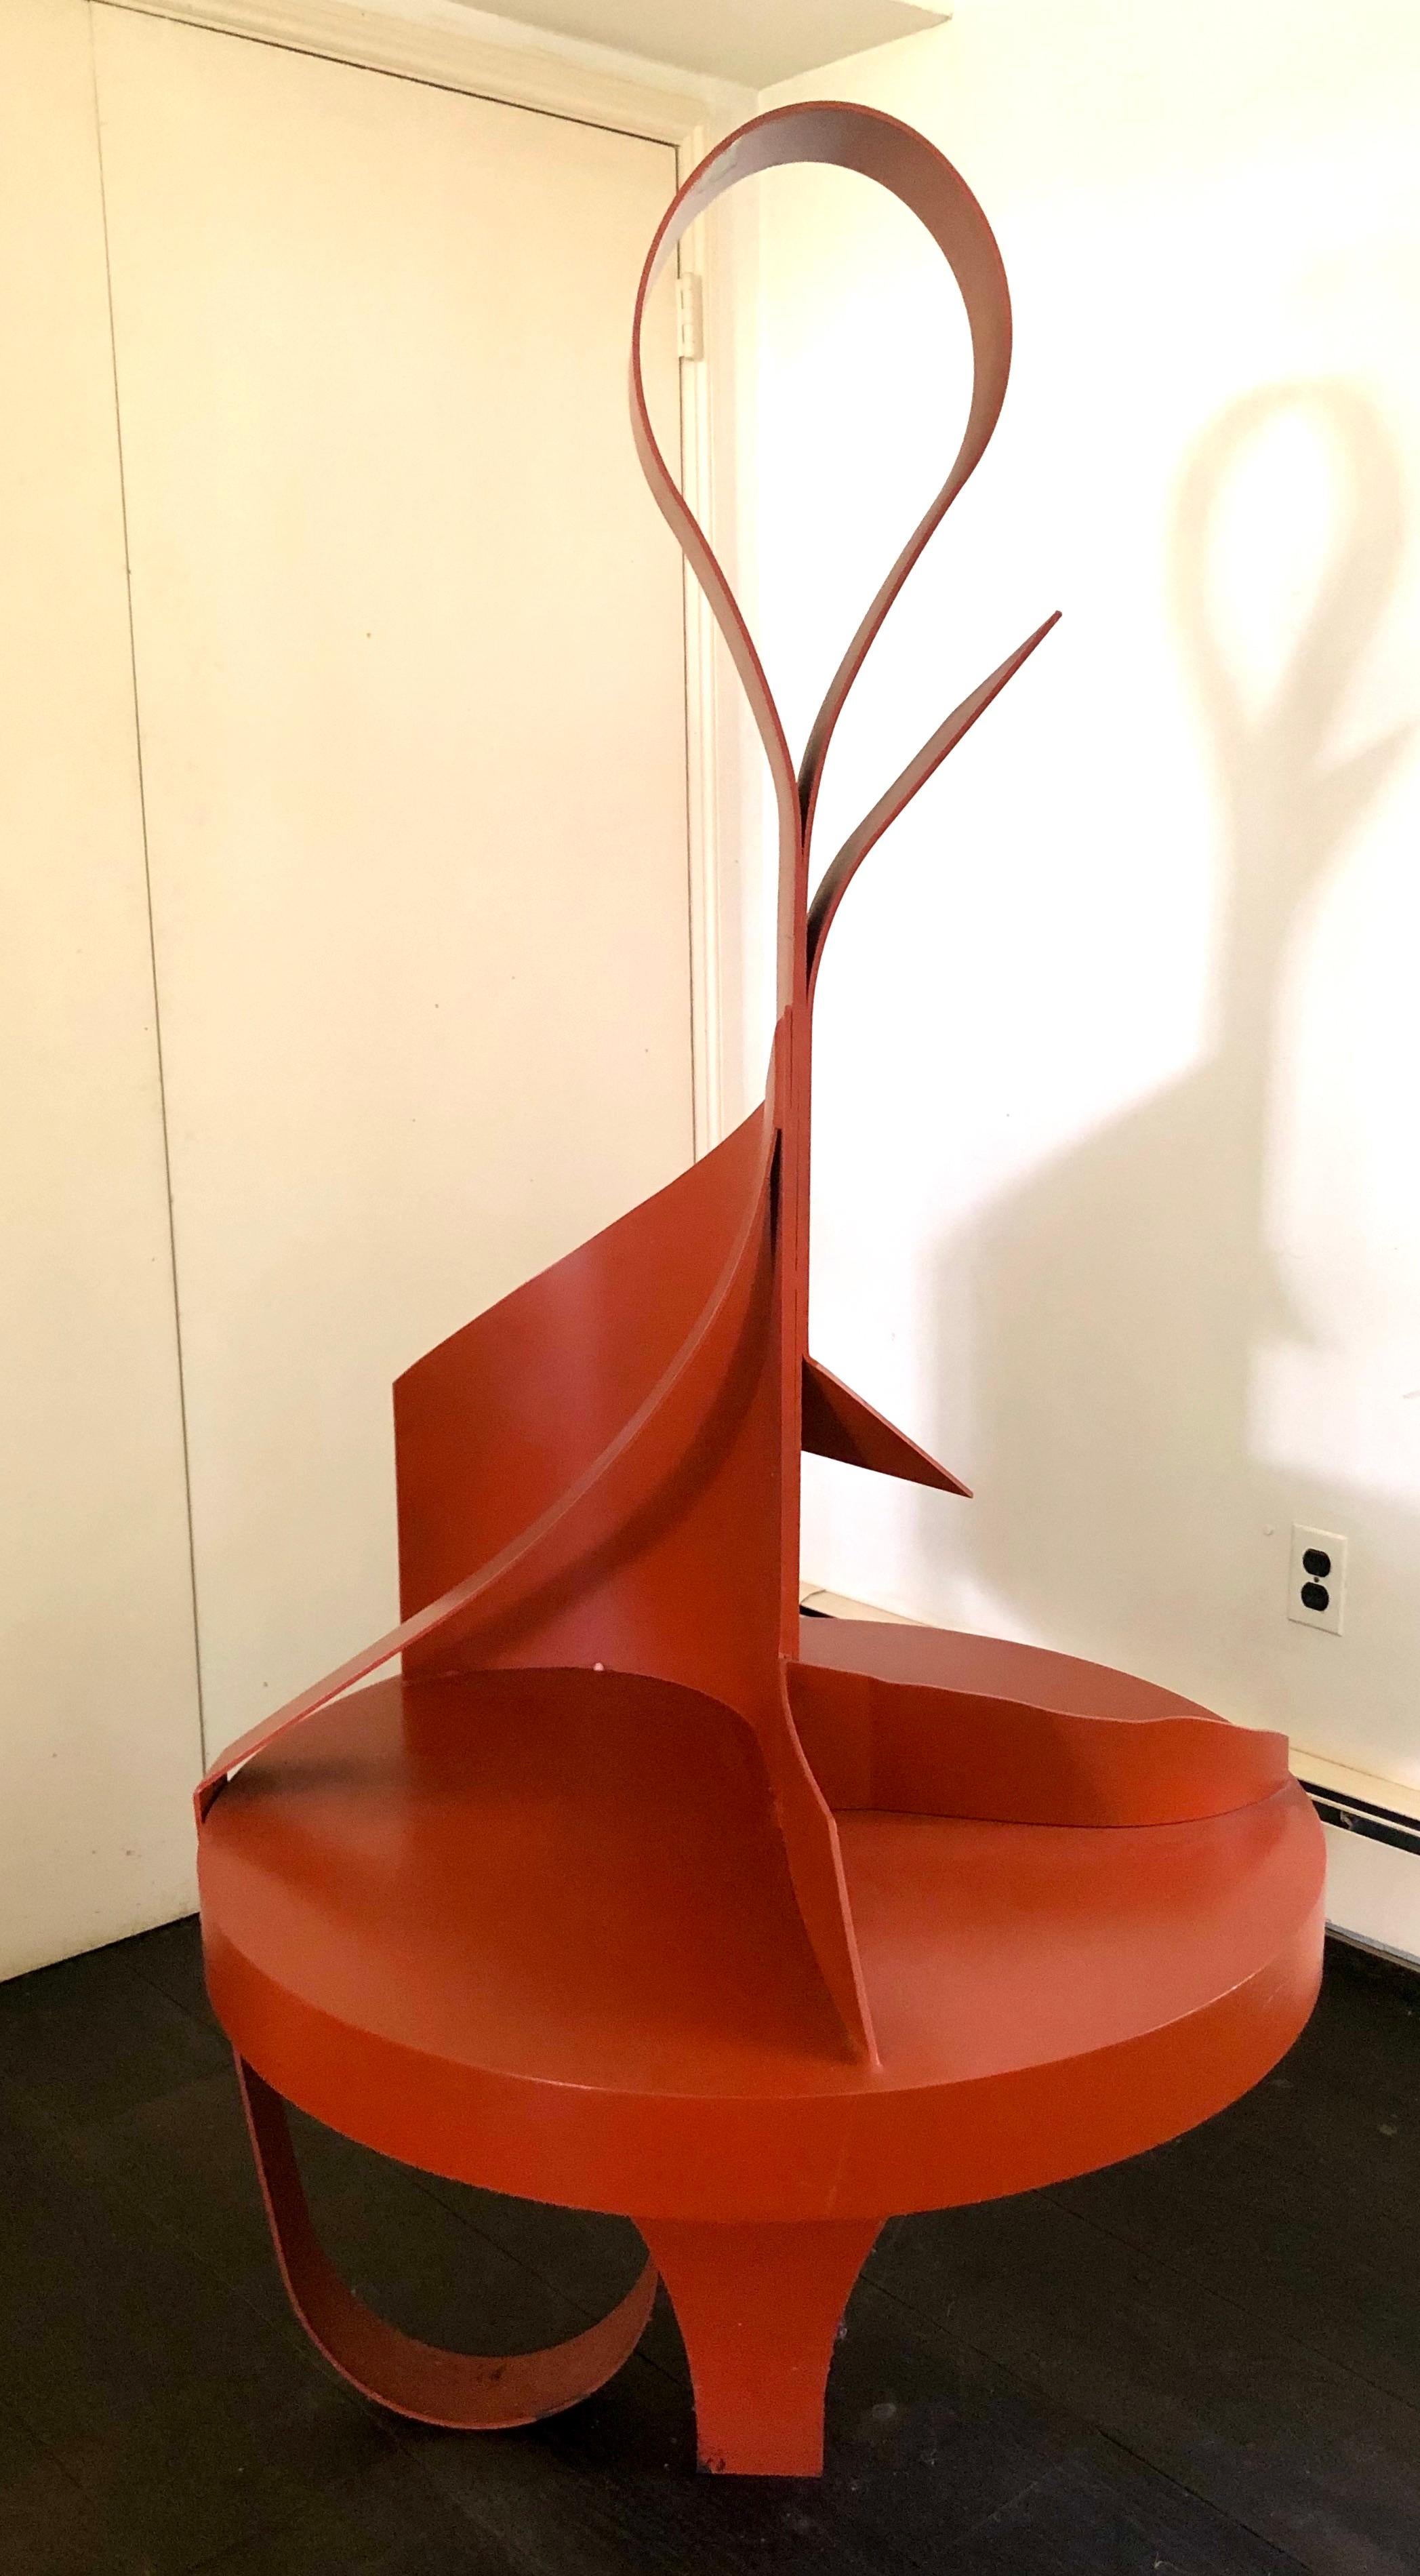 Naomi Press Abstract Sculpture - Untitled  V : abstract steel sculpture